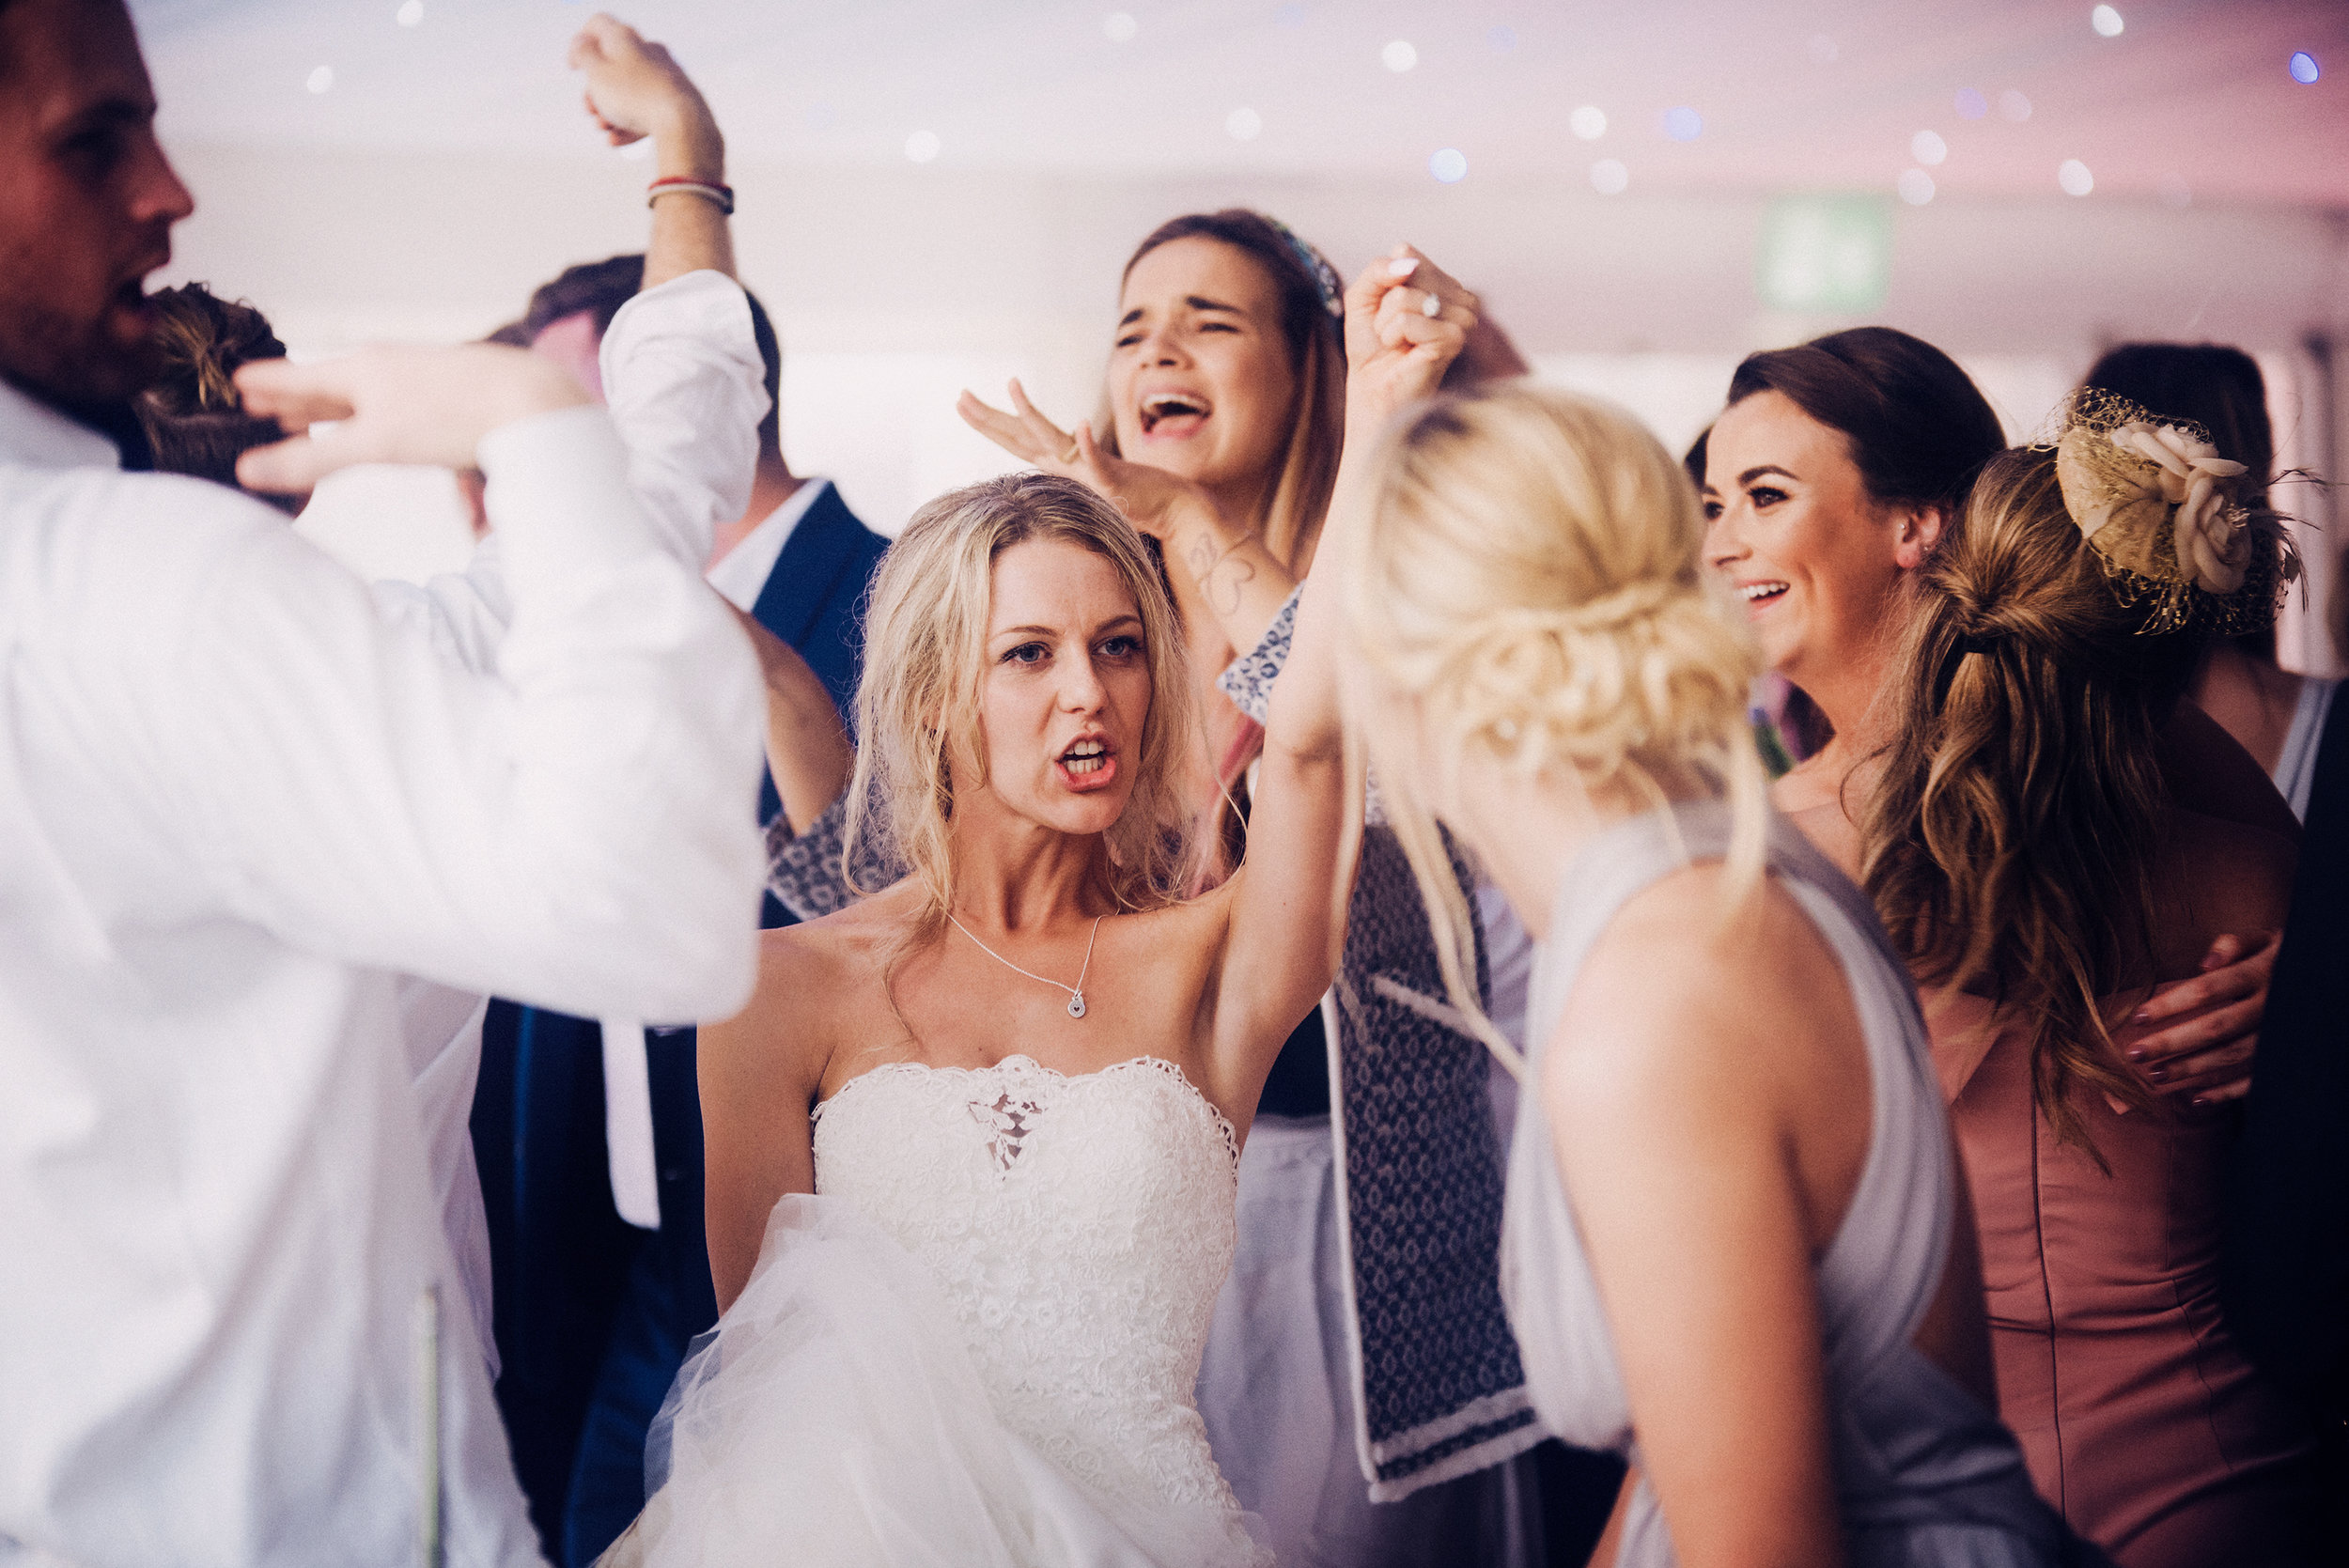 The bride and her friends on the dancefloor